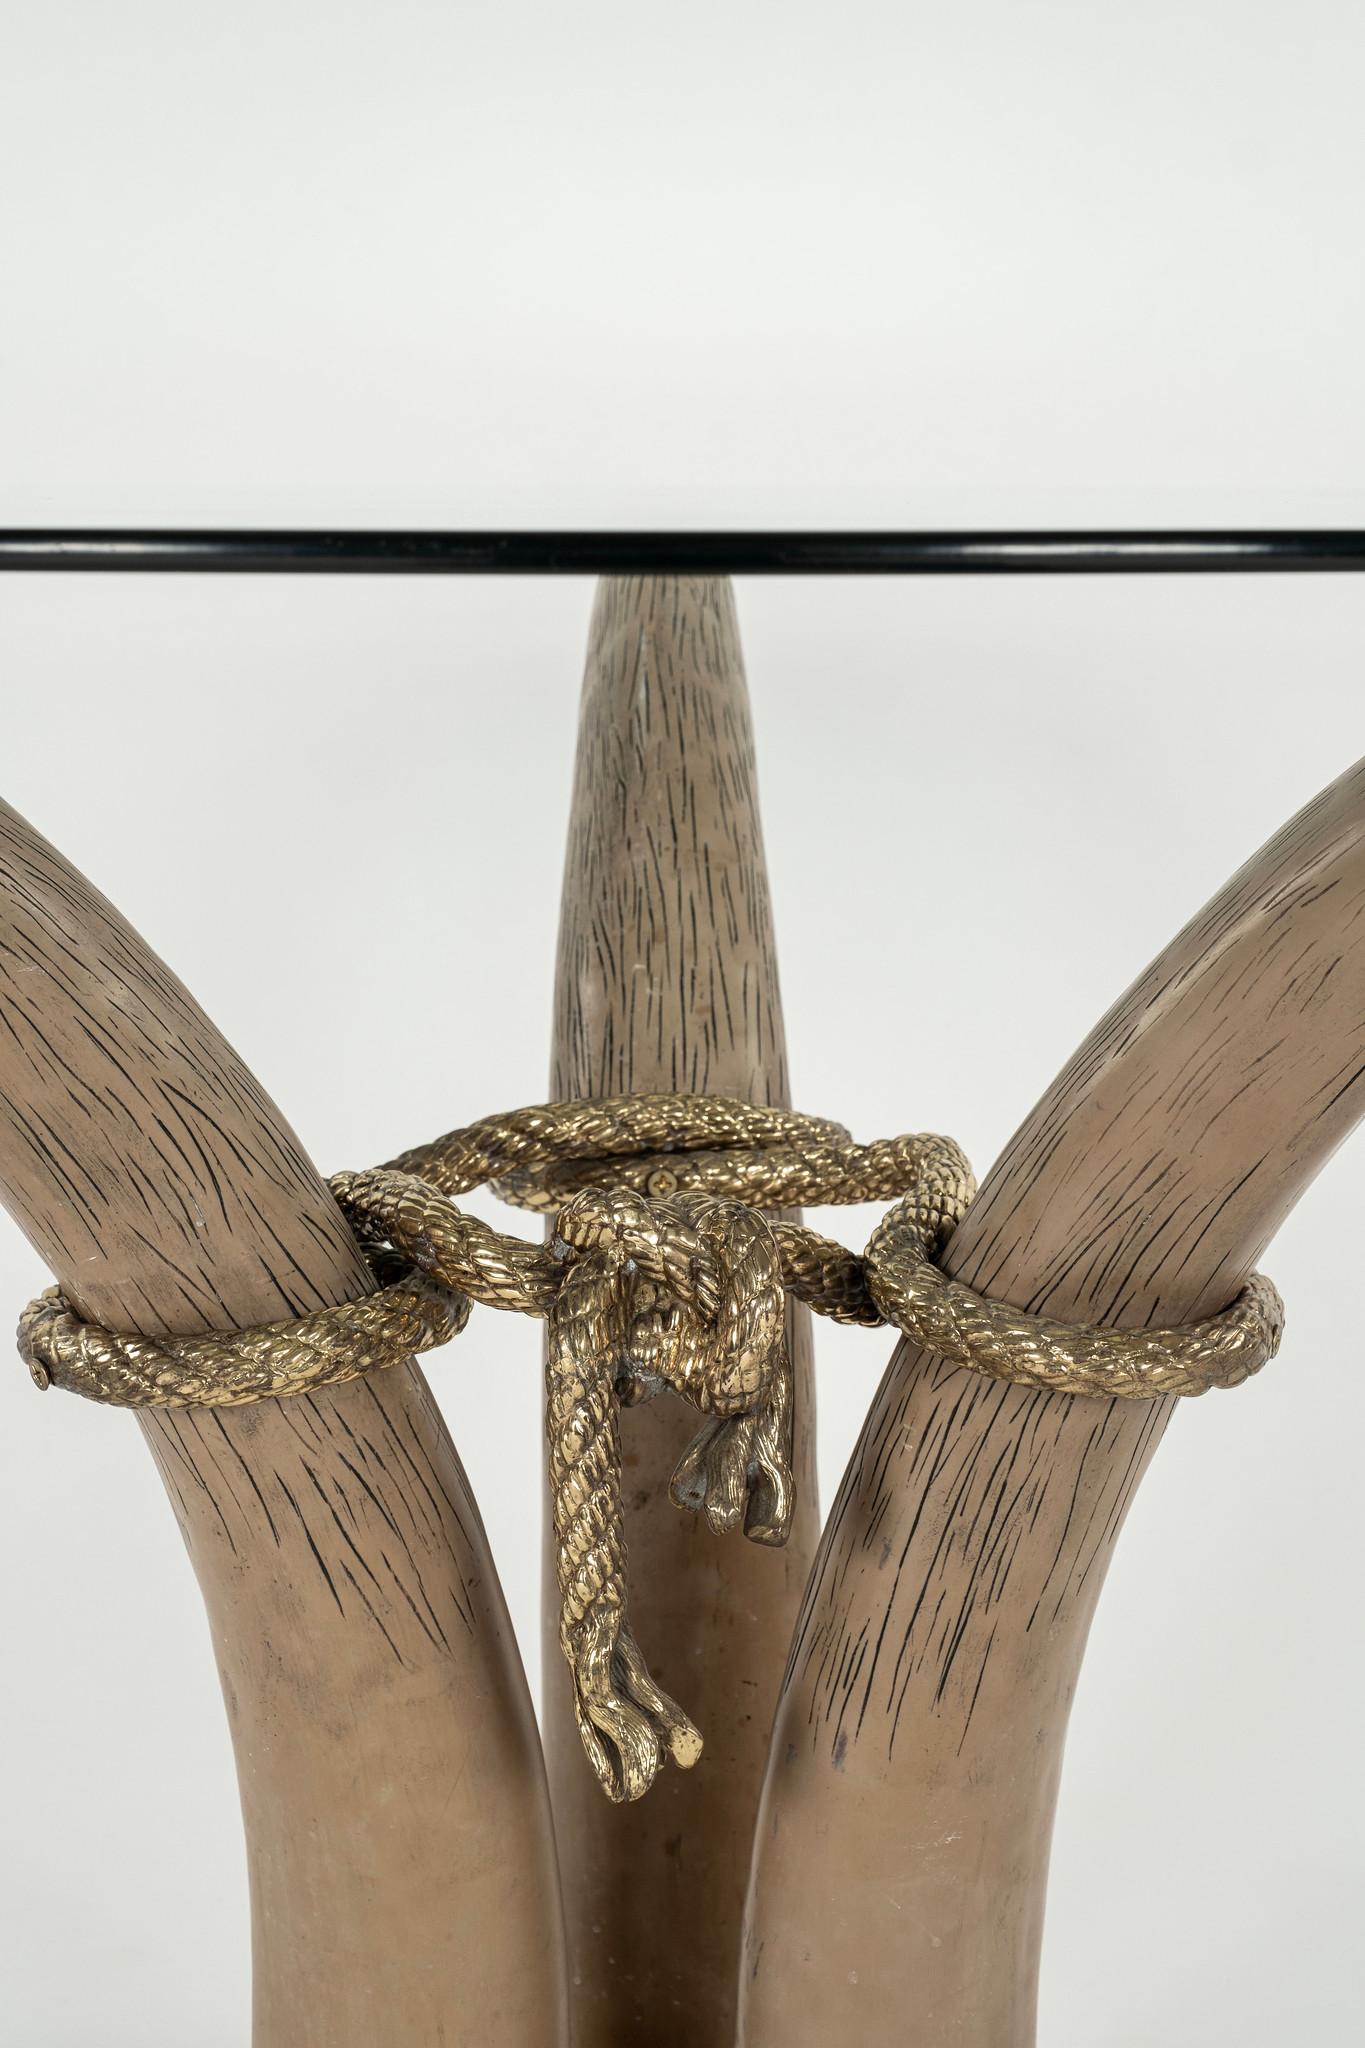 A chic and stylish 1970s faux tusk center or occasional table manufactured by Spanish luxury brand Italo Valenti.  Three mocha toned faux resin tusks tied and supported with gilded bronze rope and foot detailing.

Dimesions:
26.625”H x 37.5”D base,